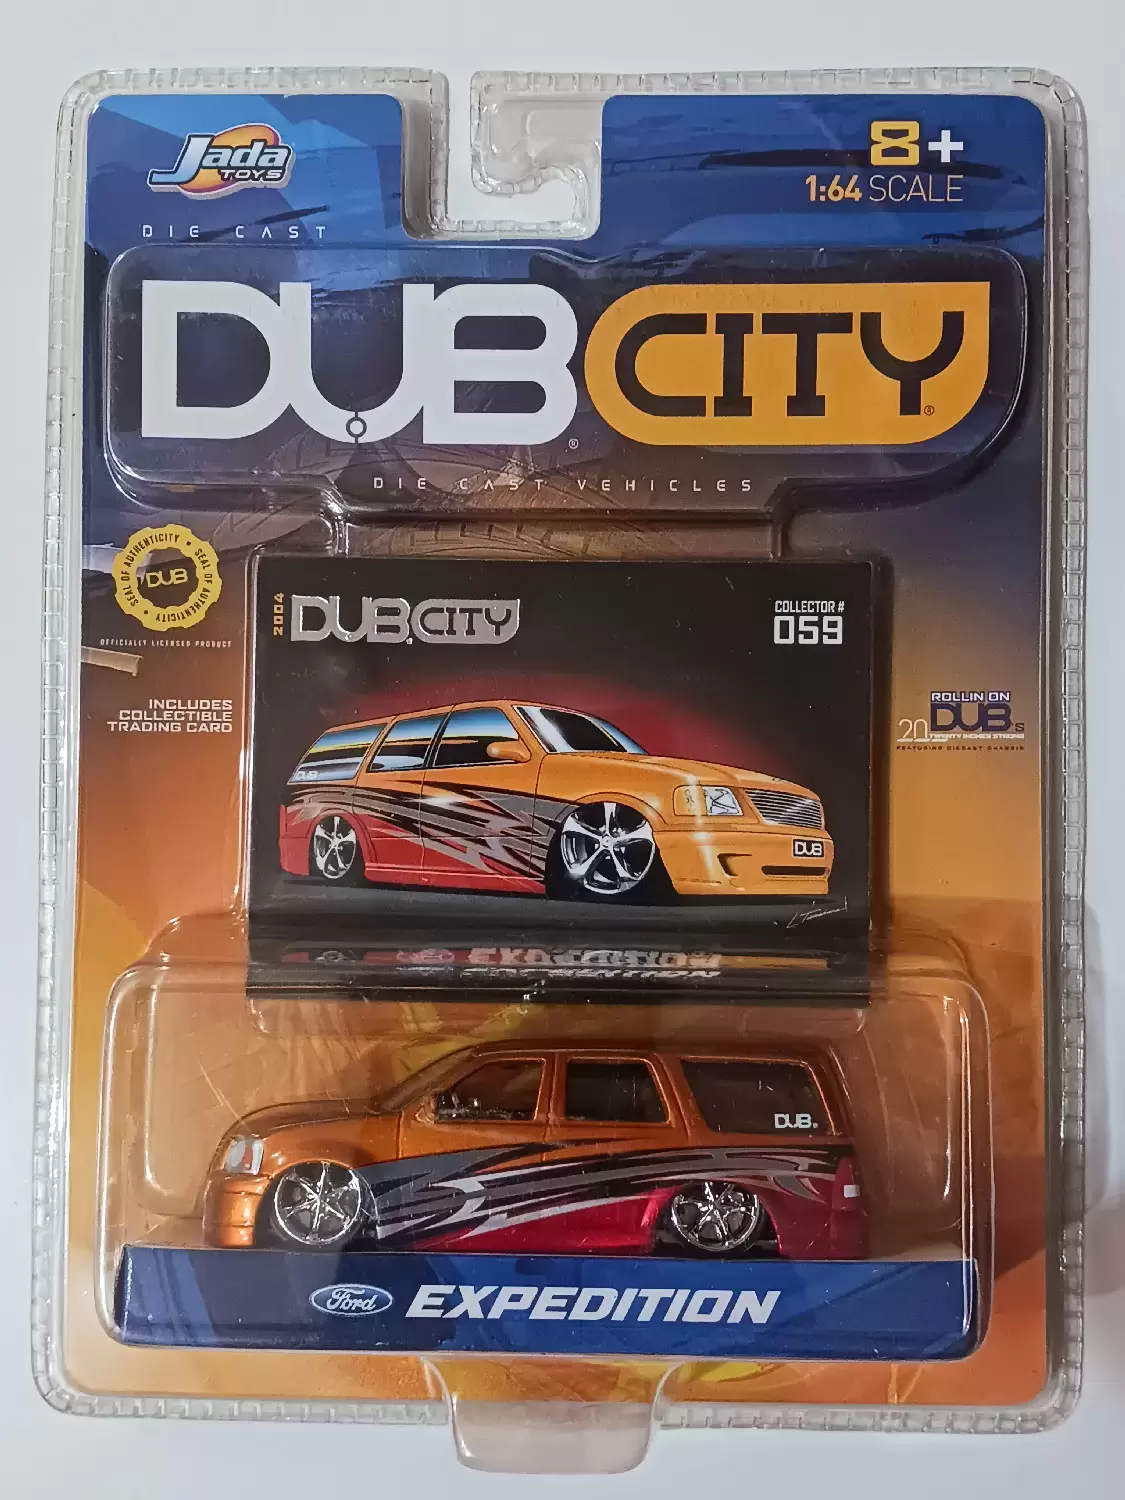 Dub City 2003 Ford Expedition - Jada Toys Hollywood Rides model